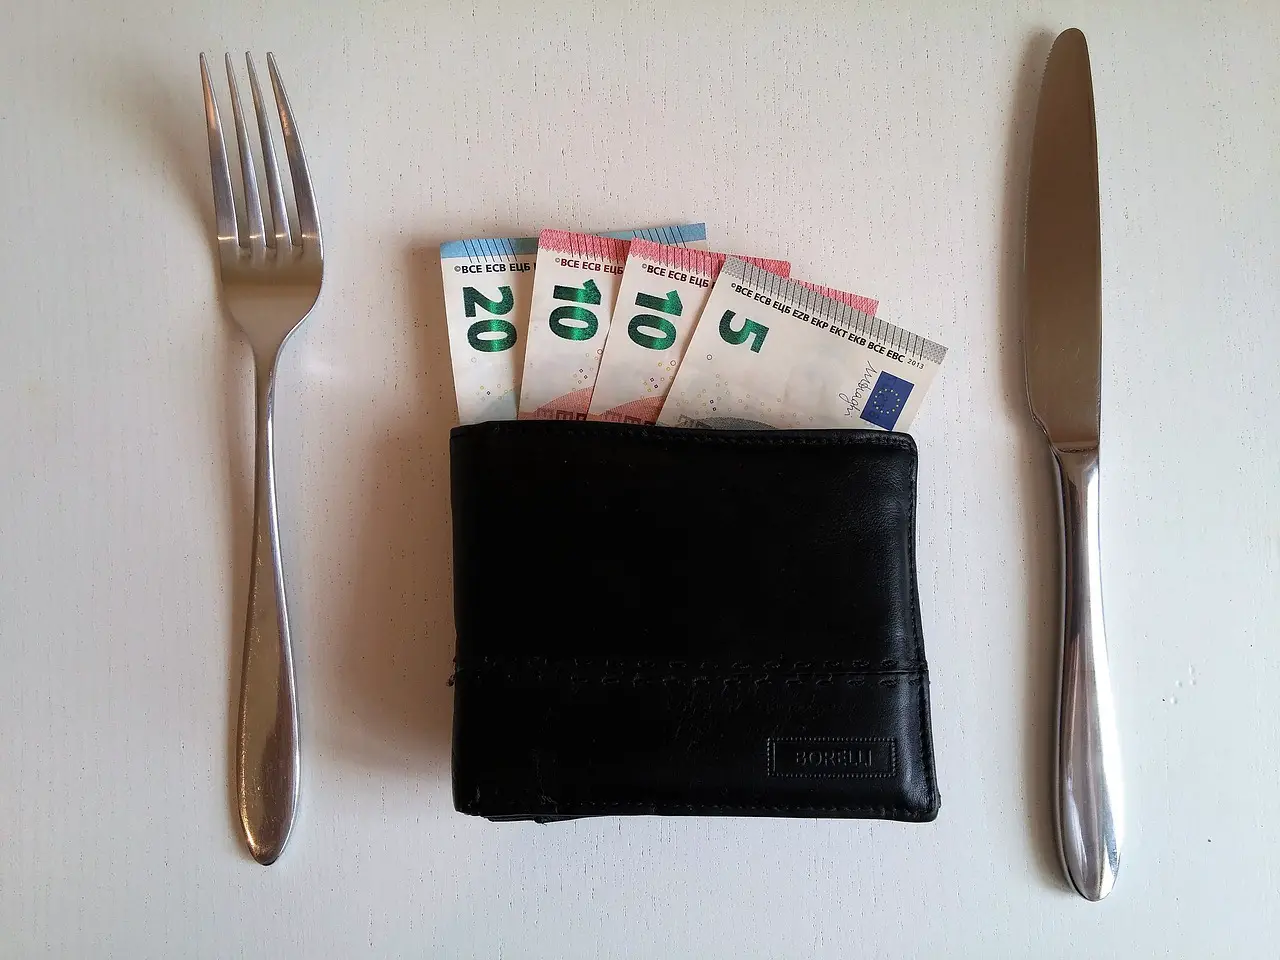 How to Deal with Food Budget